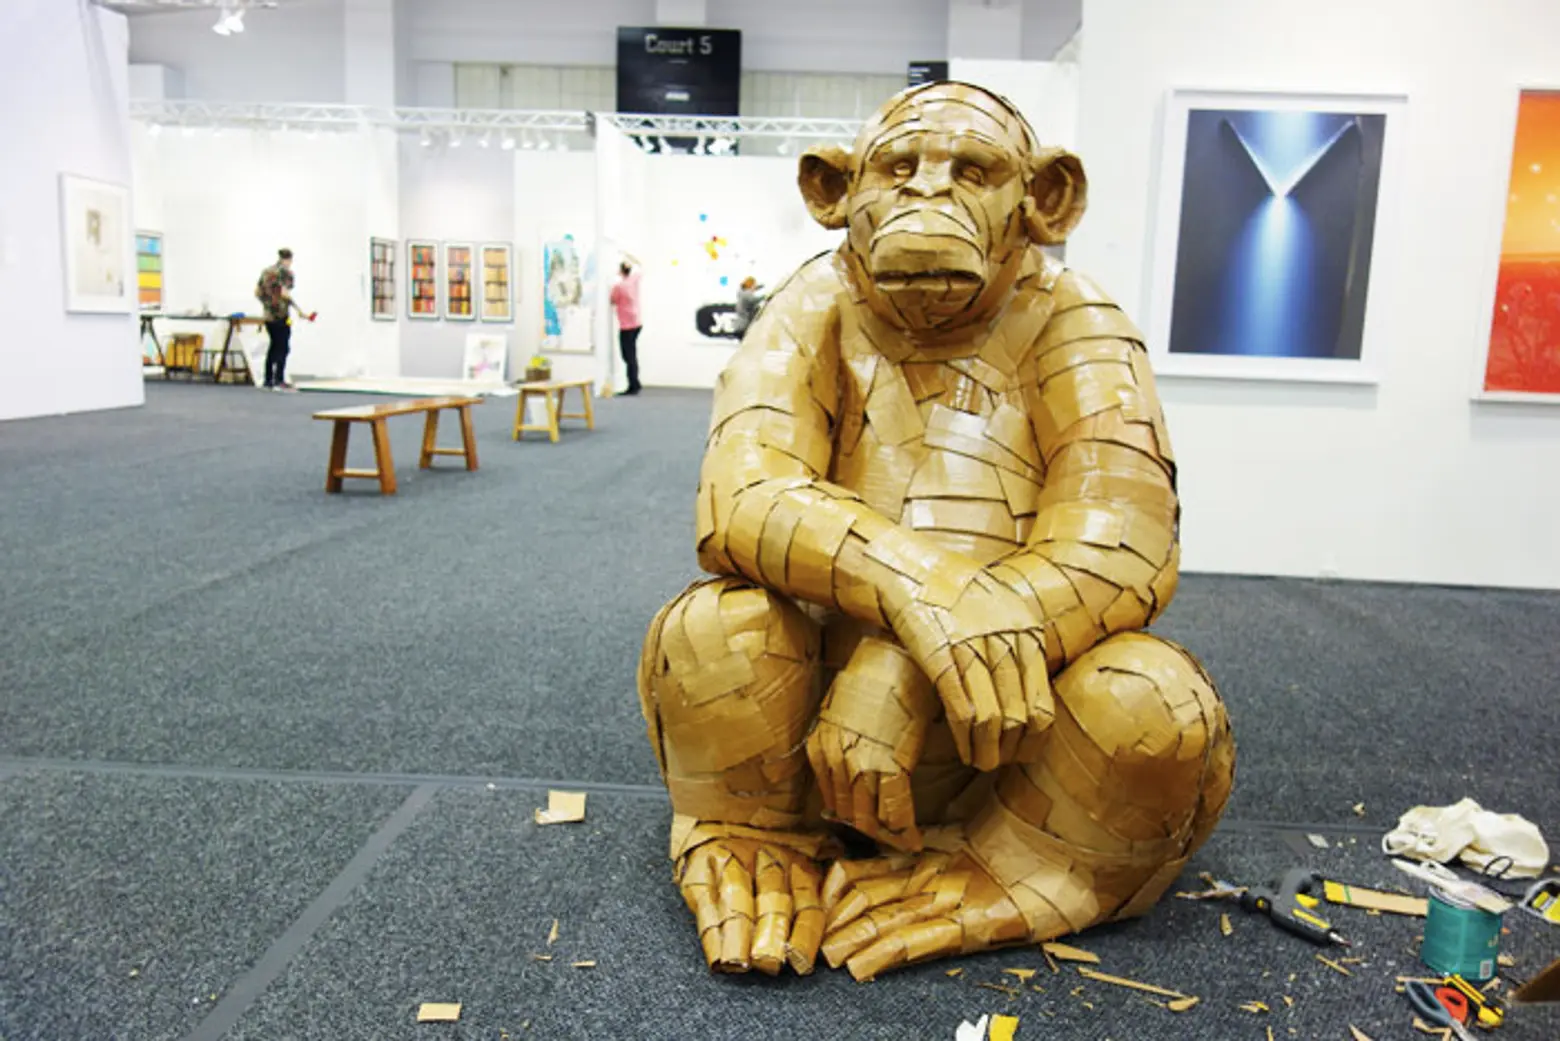 Artist Laurence Vallières Builds Giant Chimp from Up-cycled